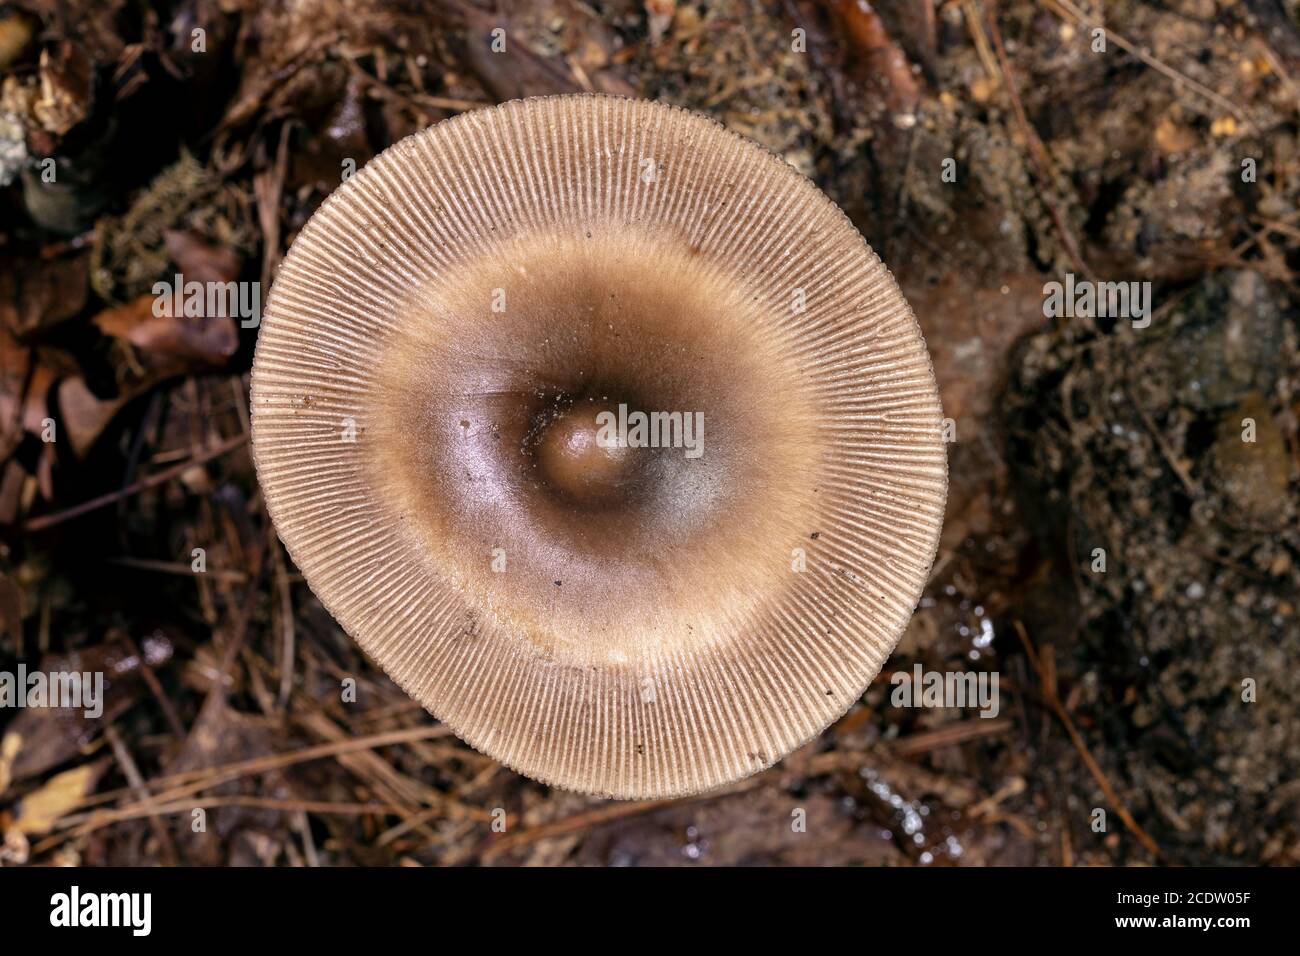 Top view of Amamita (sp.) mushroom showing strongly-lined margin of cap - Dupont State Recreational Forest - near Hendersonville, North Carolina, USA Stock Photo